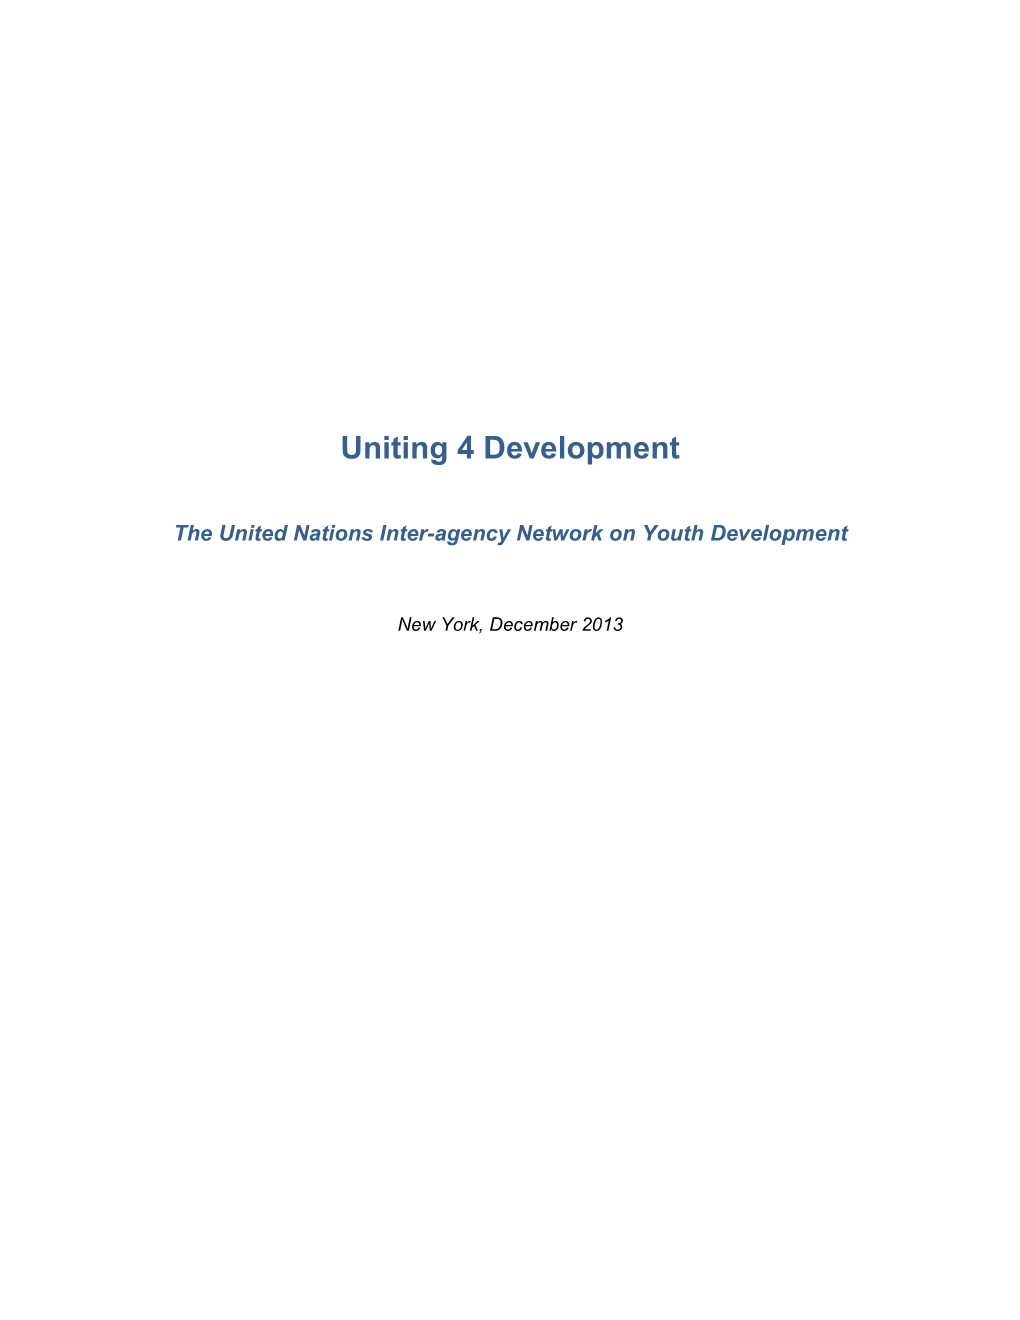 UN Inter-Agency Network on Youth Development Booklet